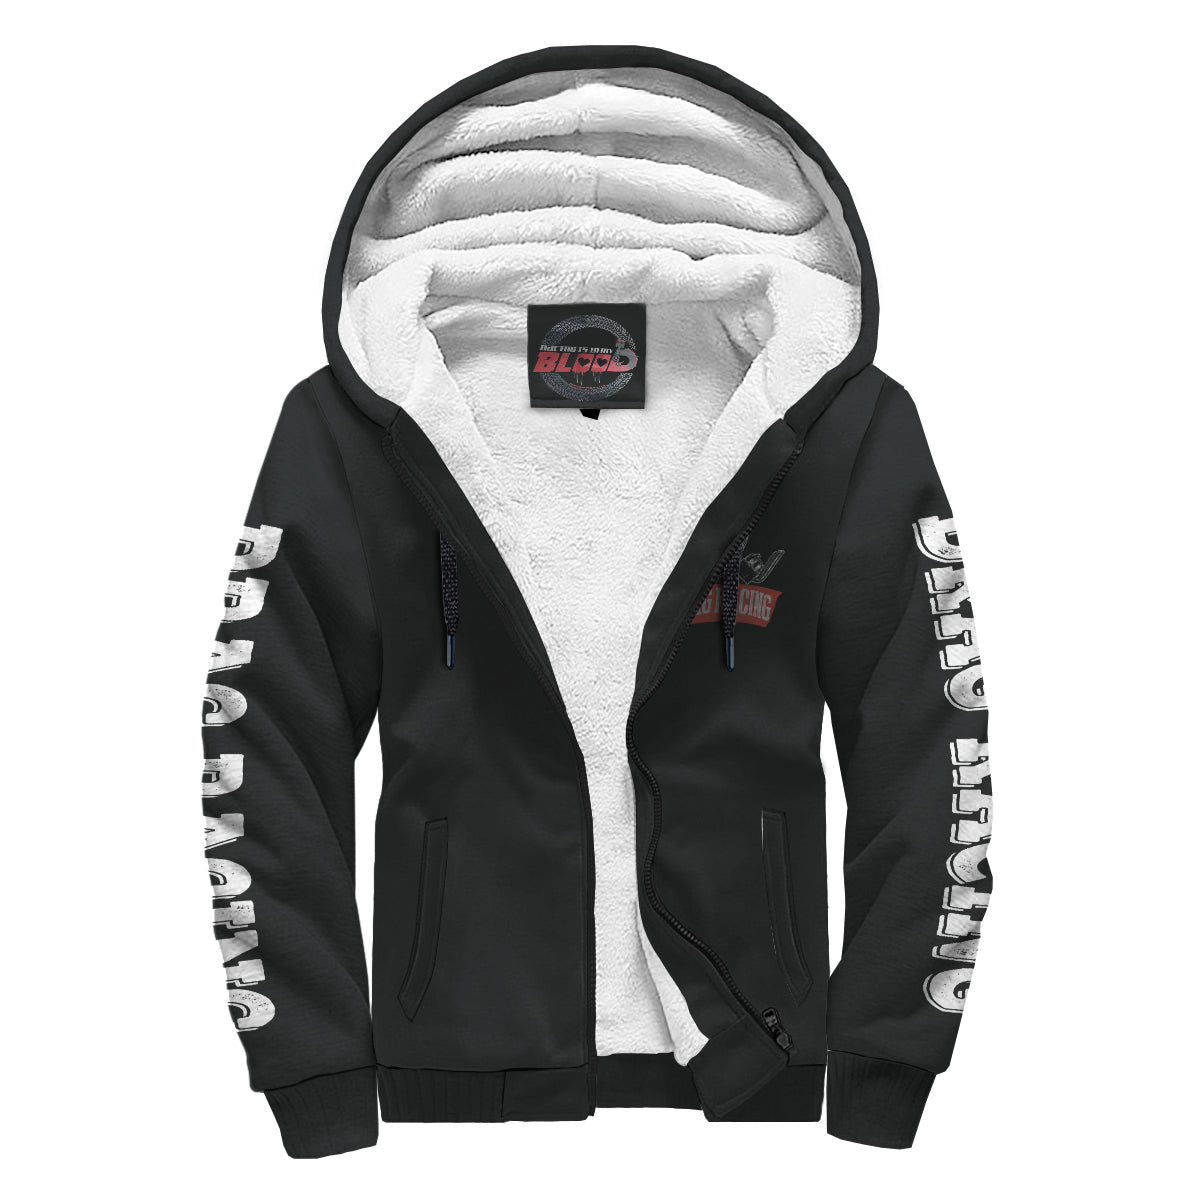 Whoever Said Money Can't Buy Happiness Drag Racing Sherpa Jacket